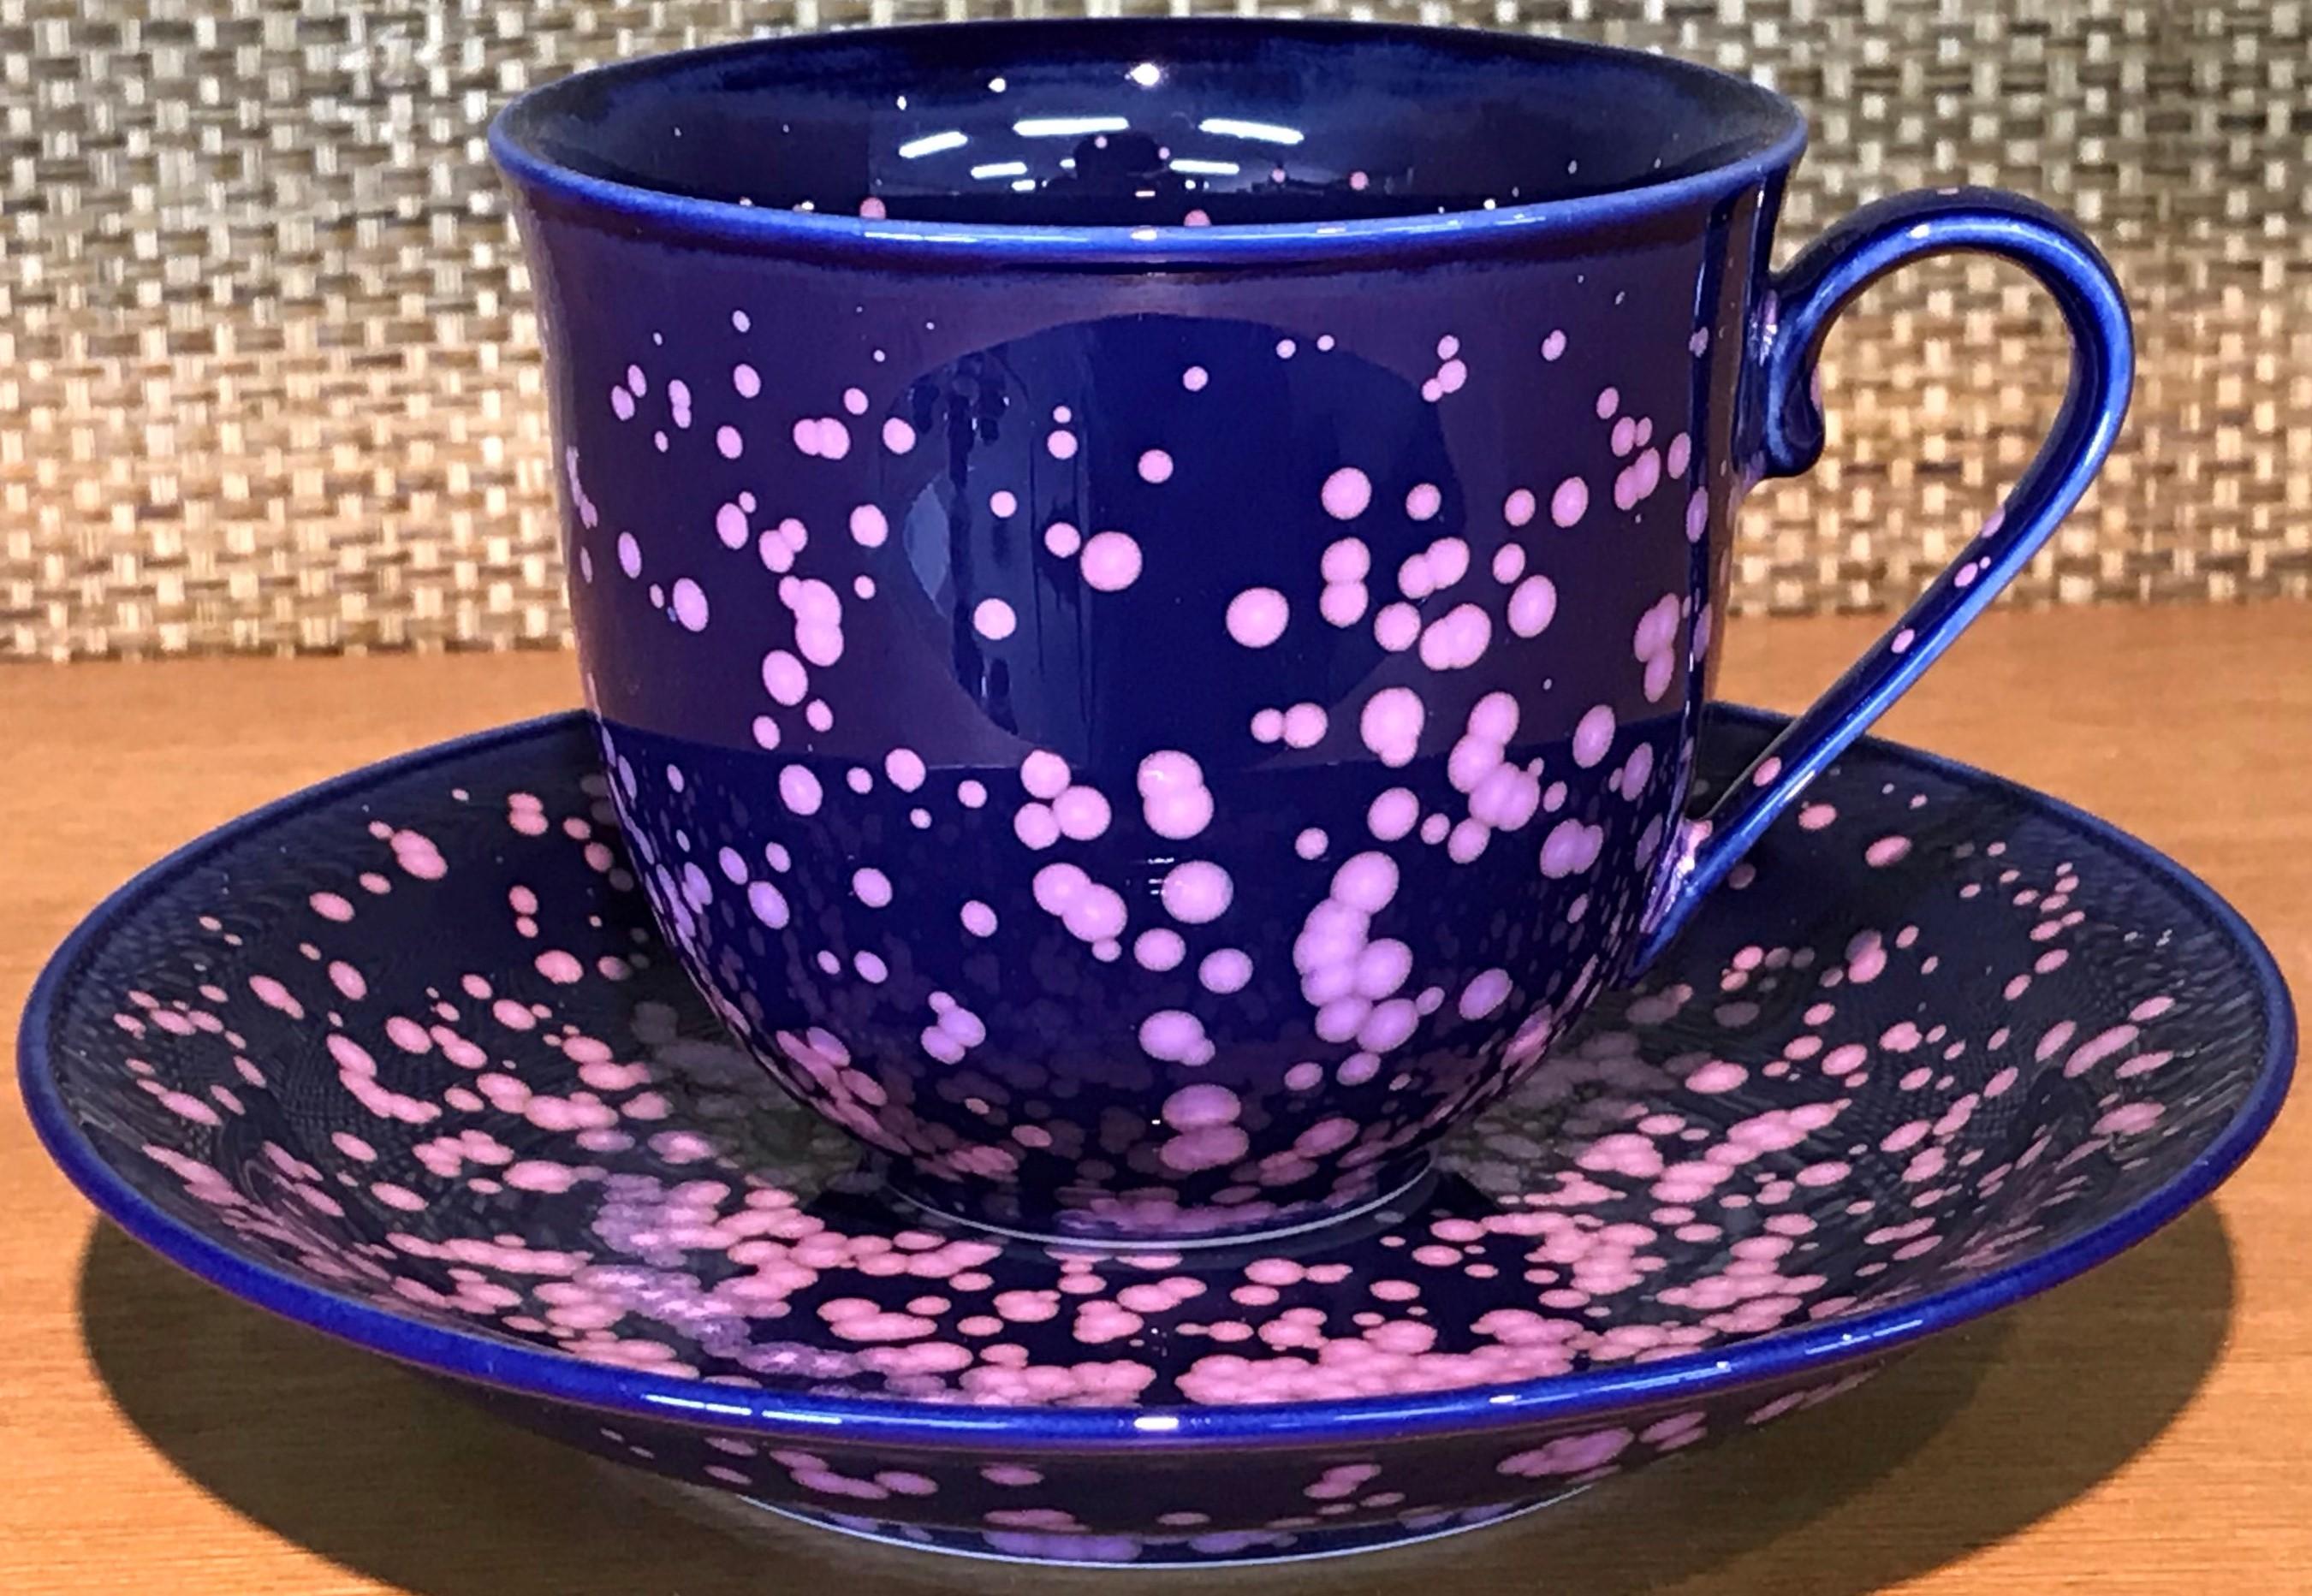 Extraordinary set of six contemporary Japanese hand-glazed ceramic cups and saucers in a beautiful shape in six of his signature colors, masterfully glazed to showcase the artist's signature glazing techniques, works by widely respected